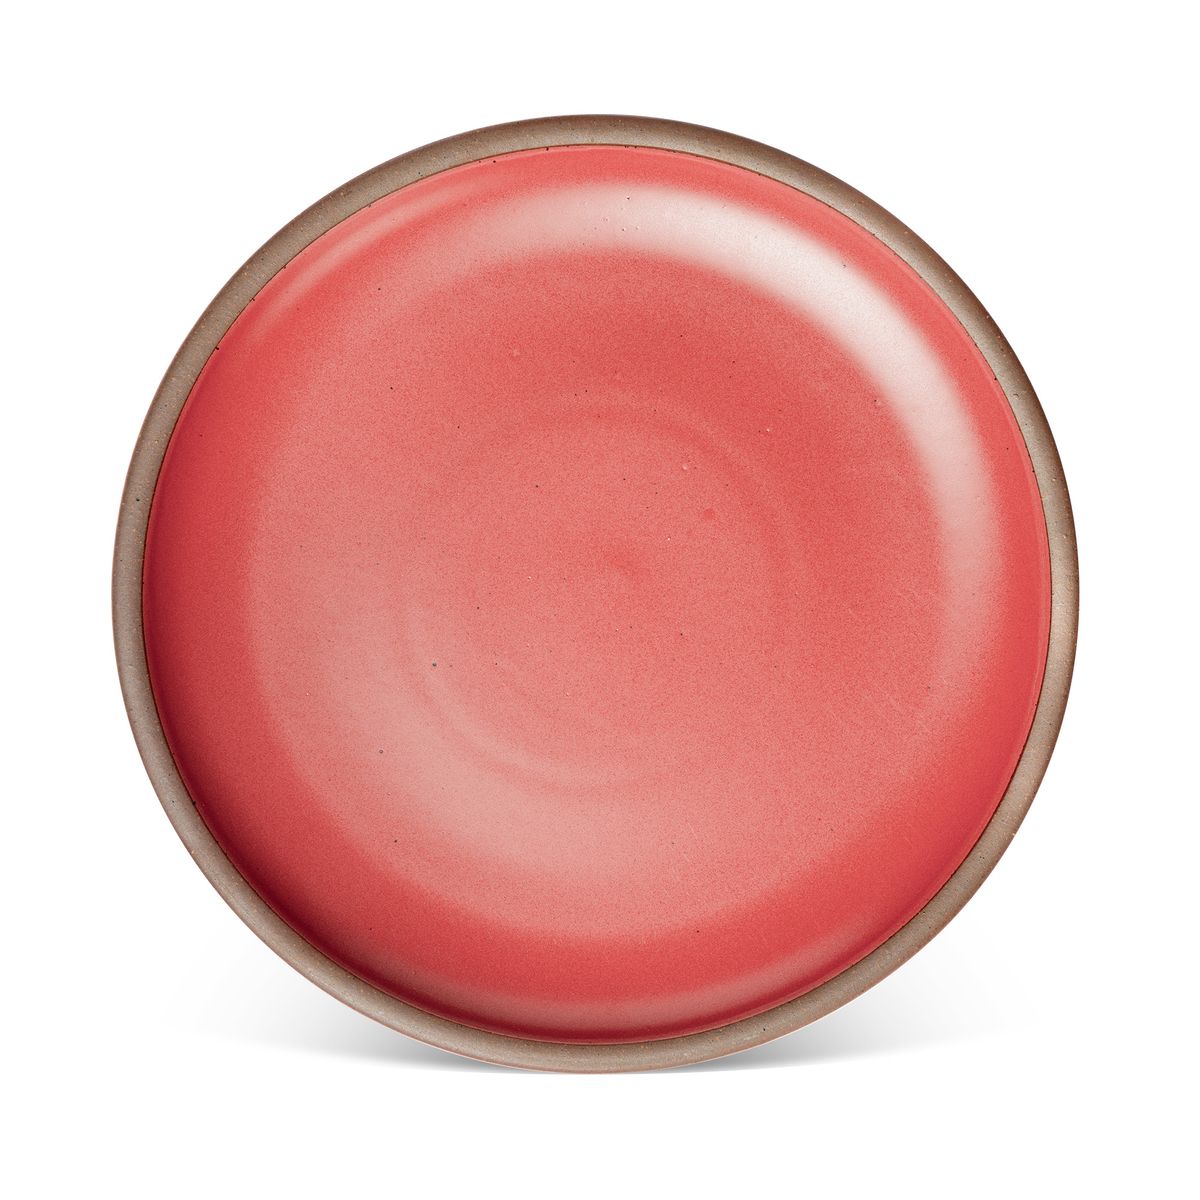 A large ceramic platter in a bold red color featuring iron speckles and an unglazed rim